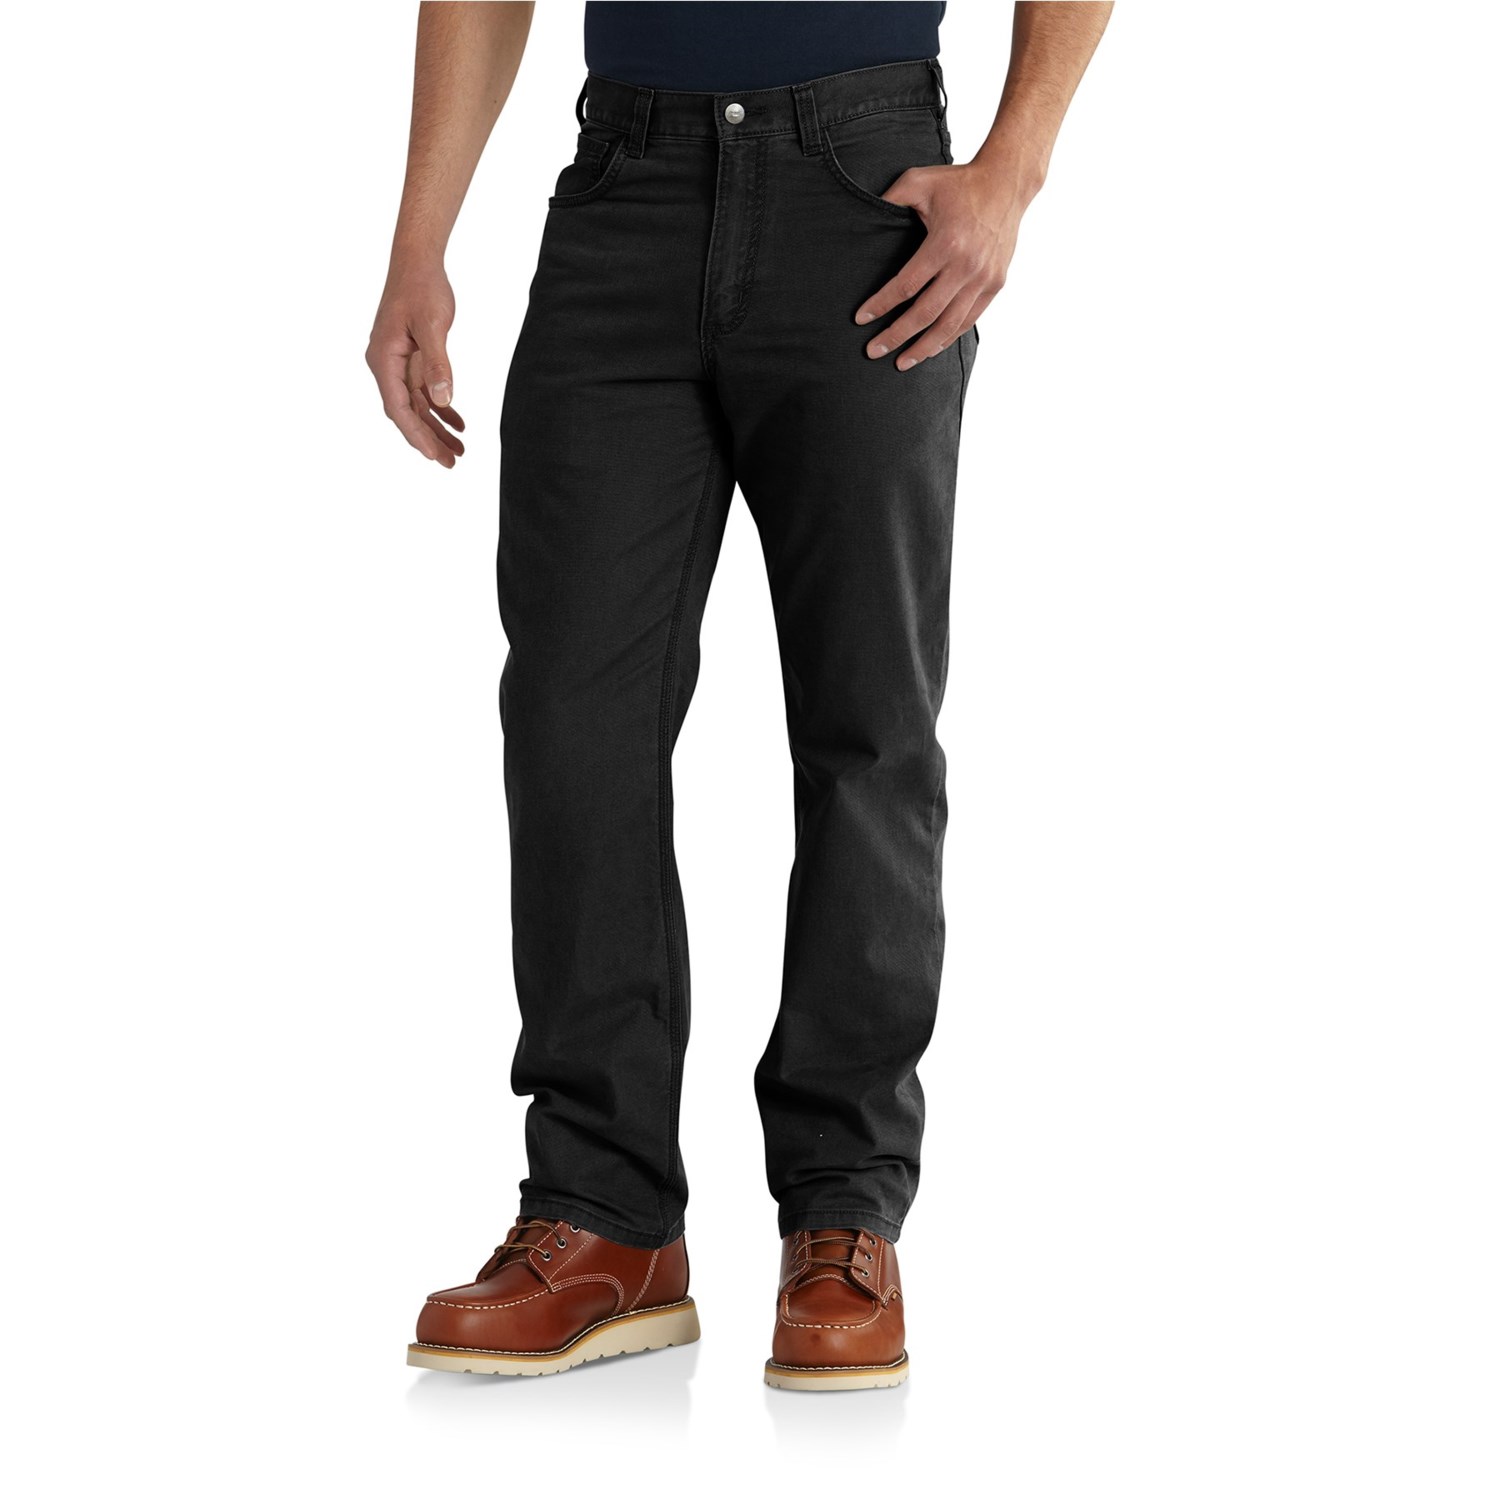 Carhartt 102517 Rugged Flex® Rigby Work Pants - Relaxed Fit